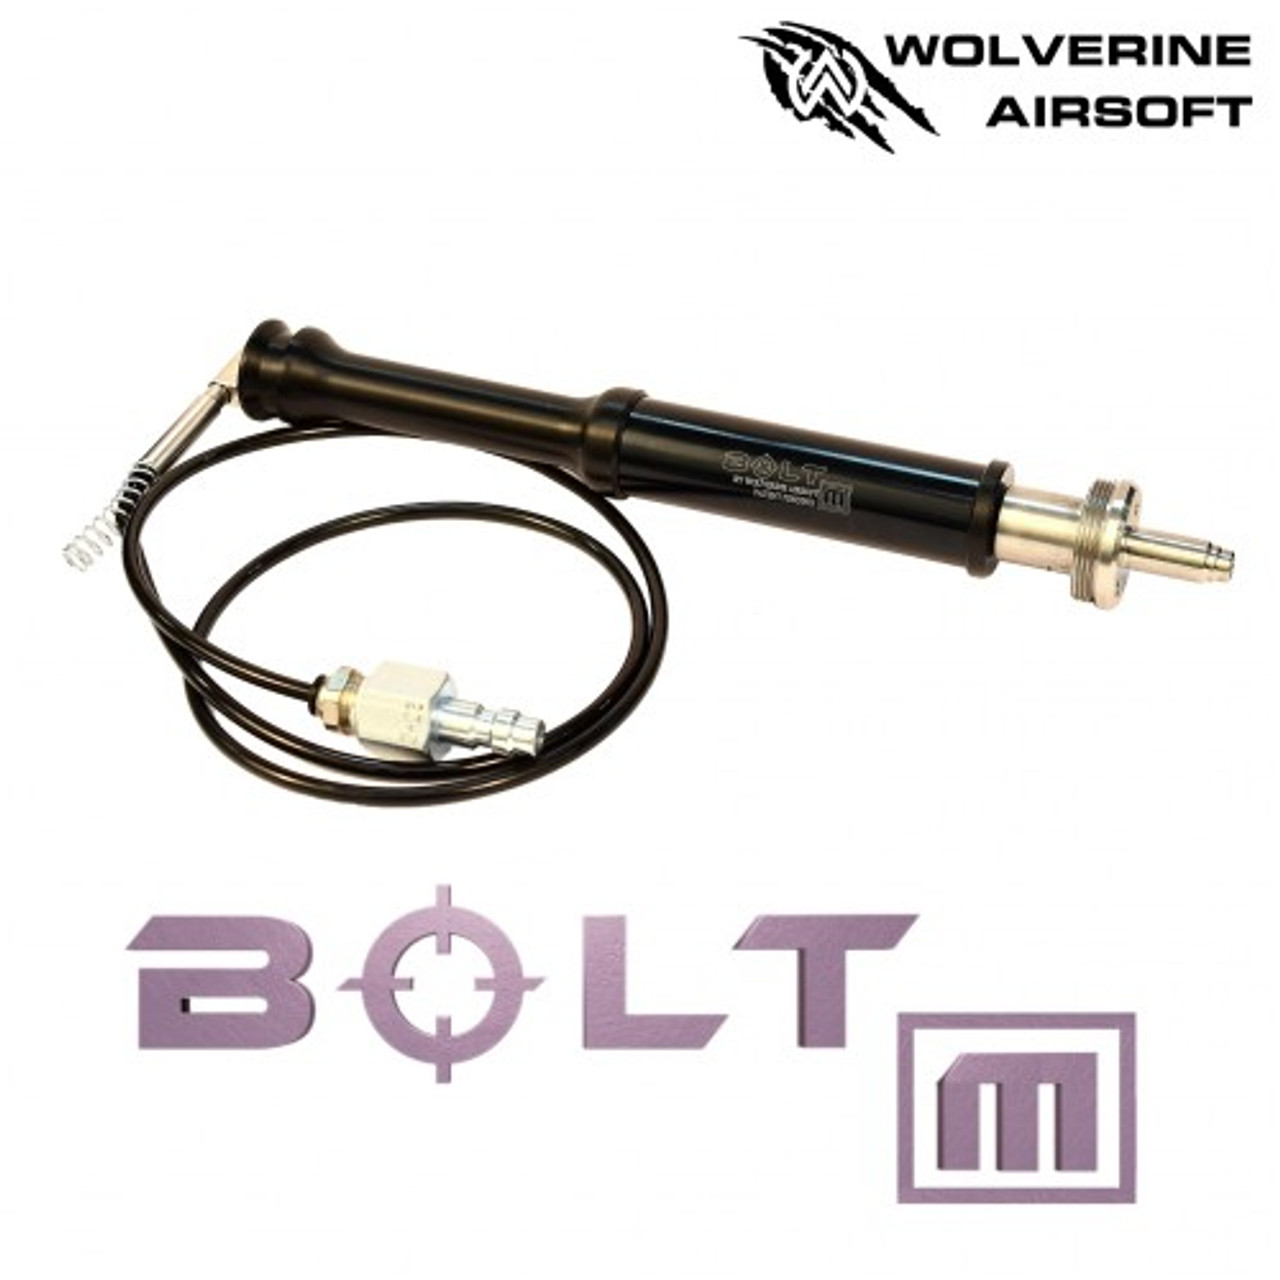 Wolverine Airsoft Bolt M Mechanical Engine for Ares Striker